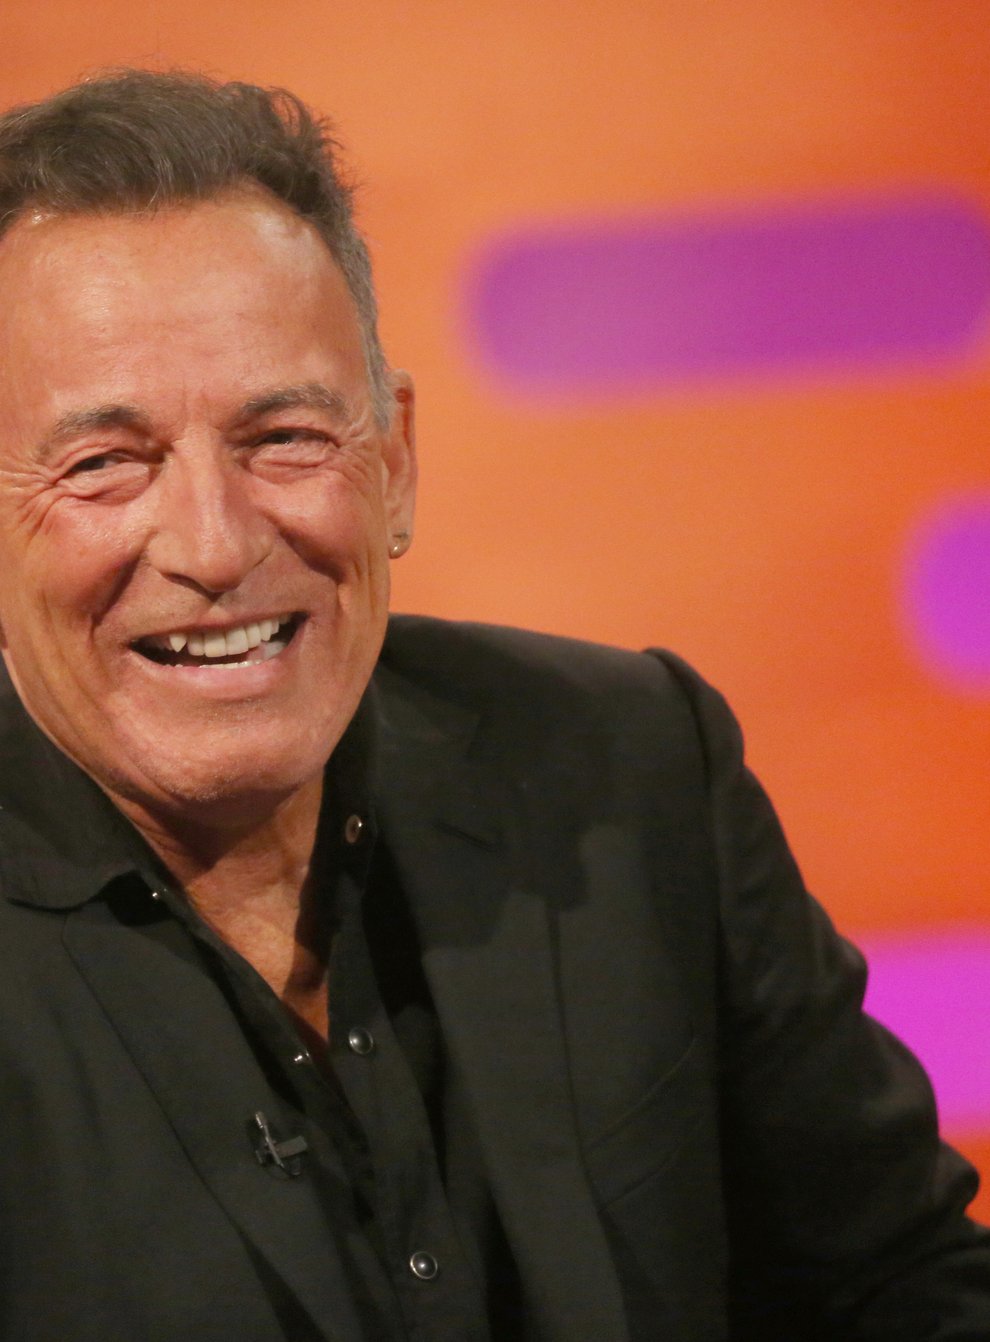 Springsteen has once again criticised Trump